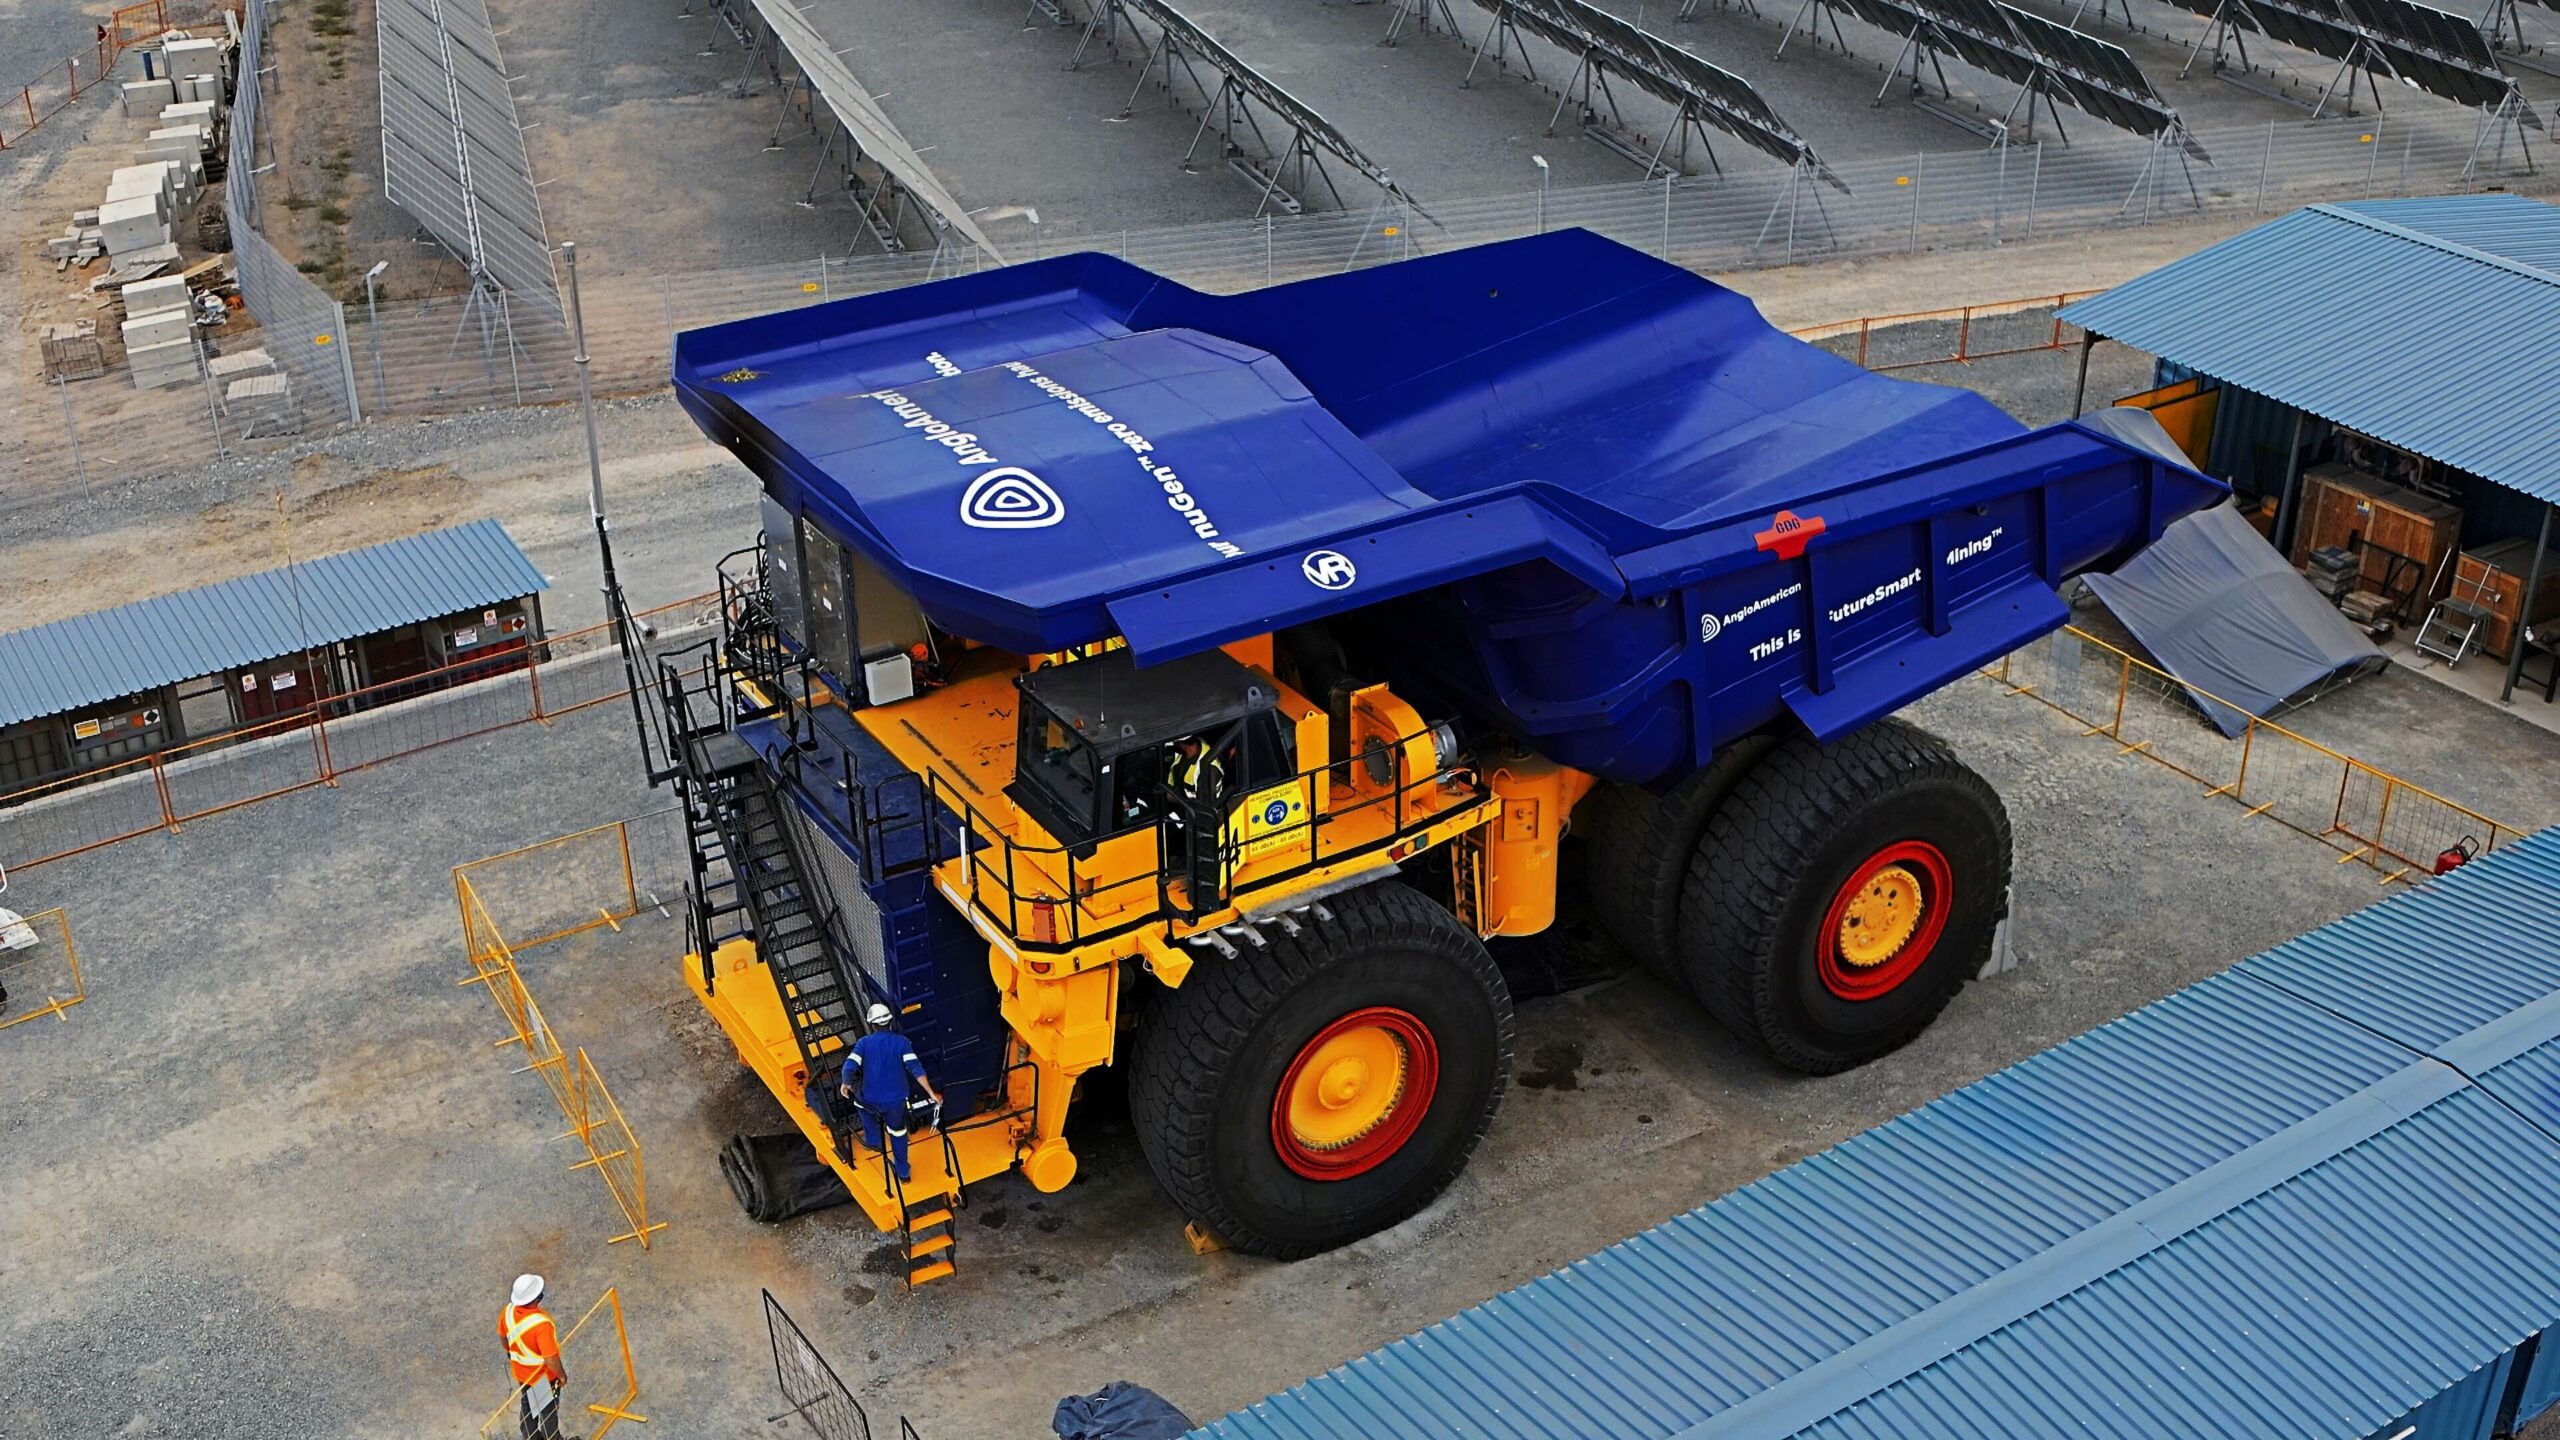 World's First Zero-Emission Haul Truck (Anglo American)